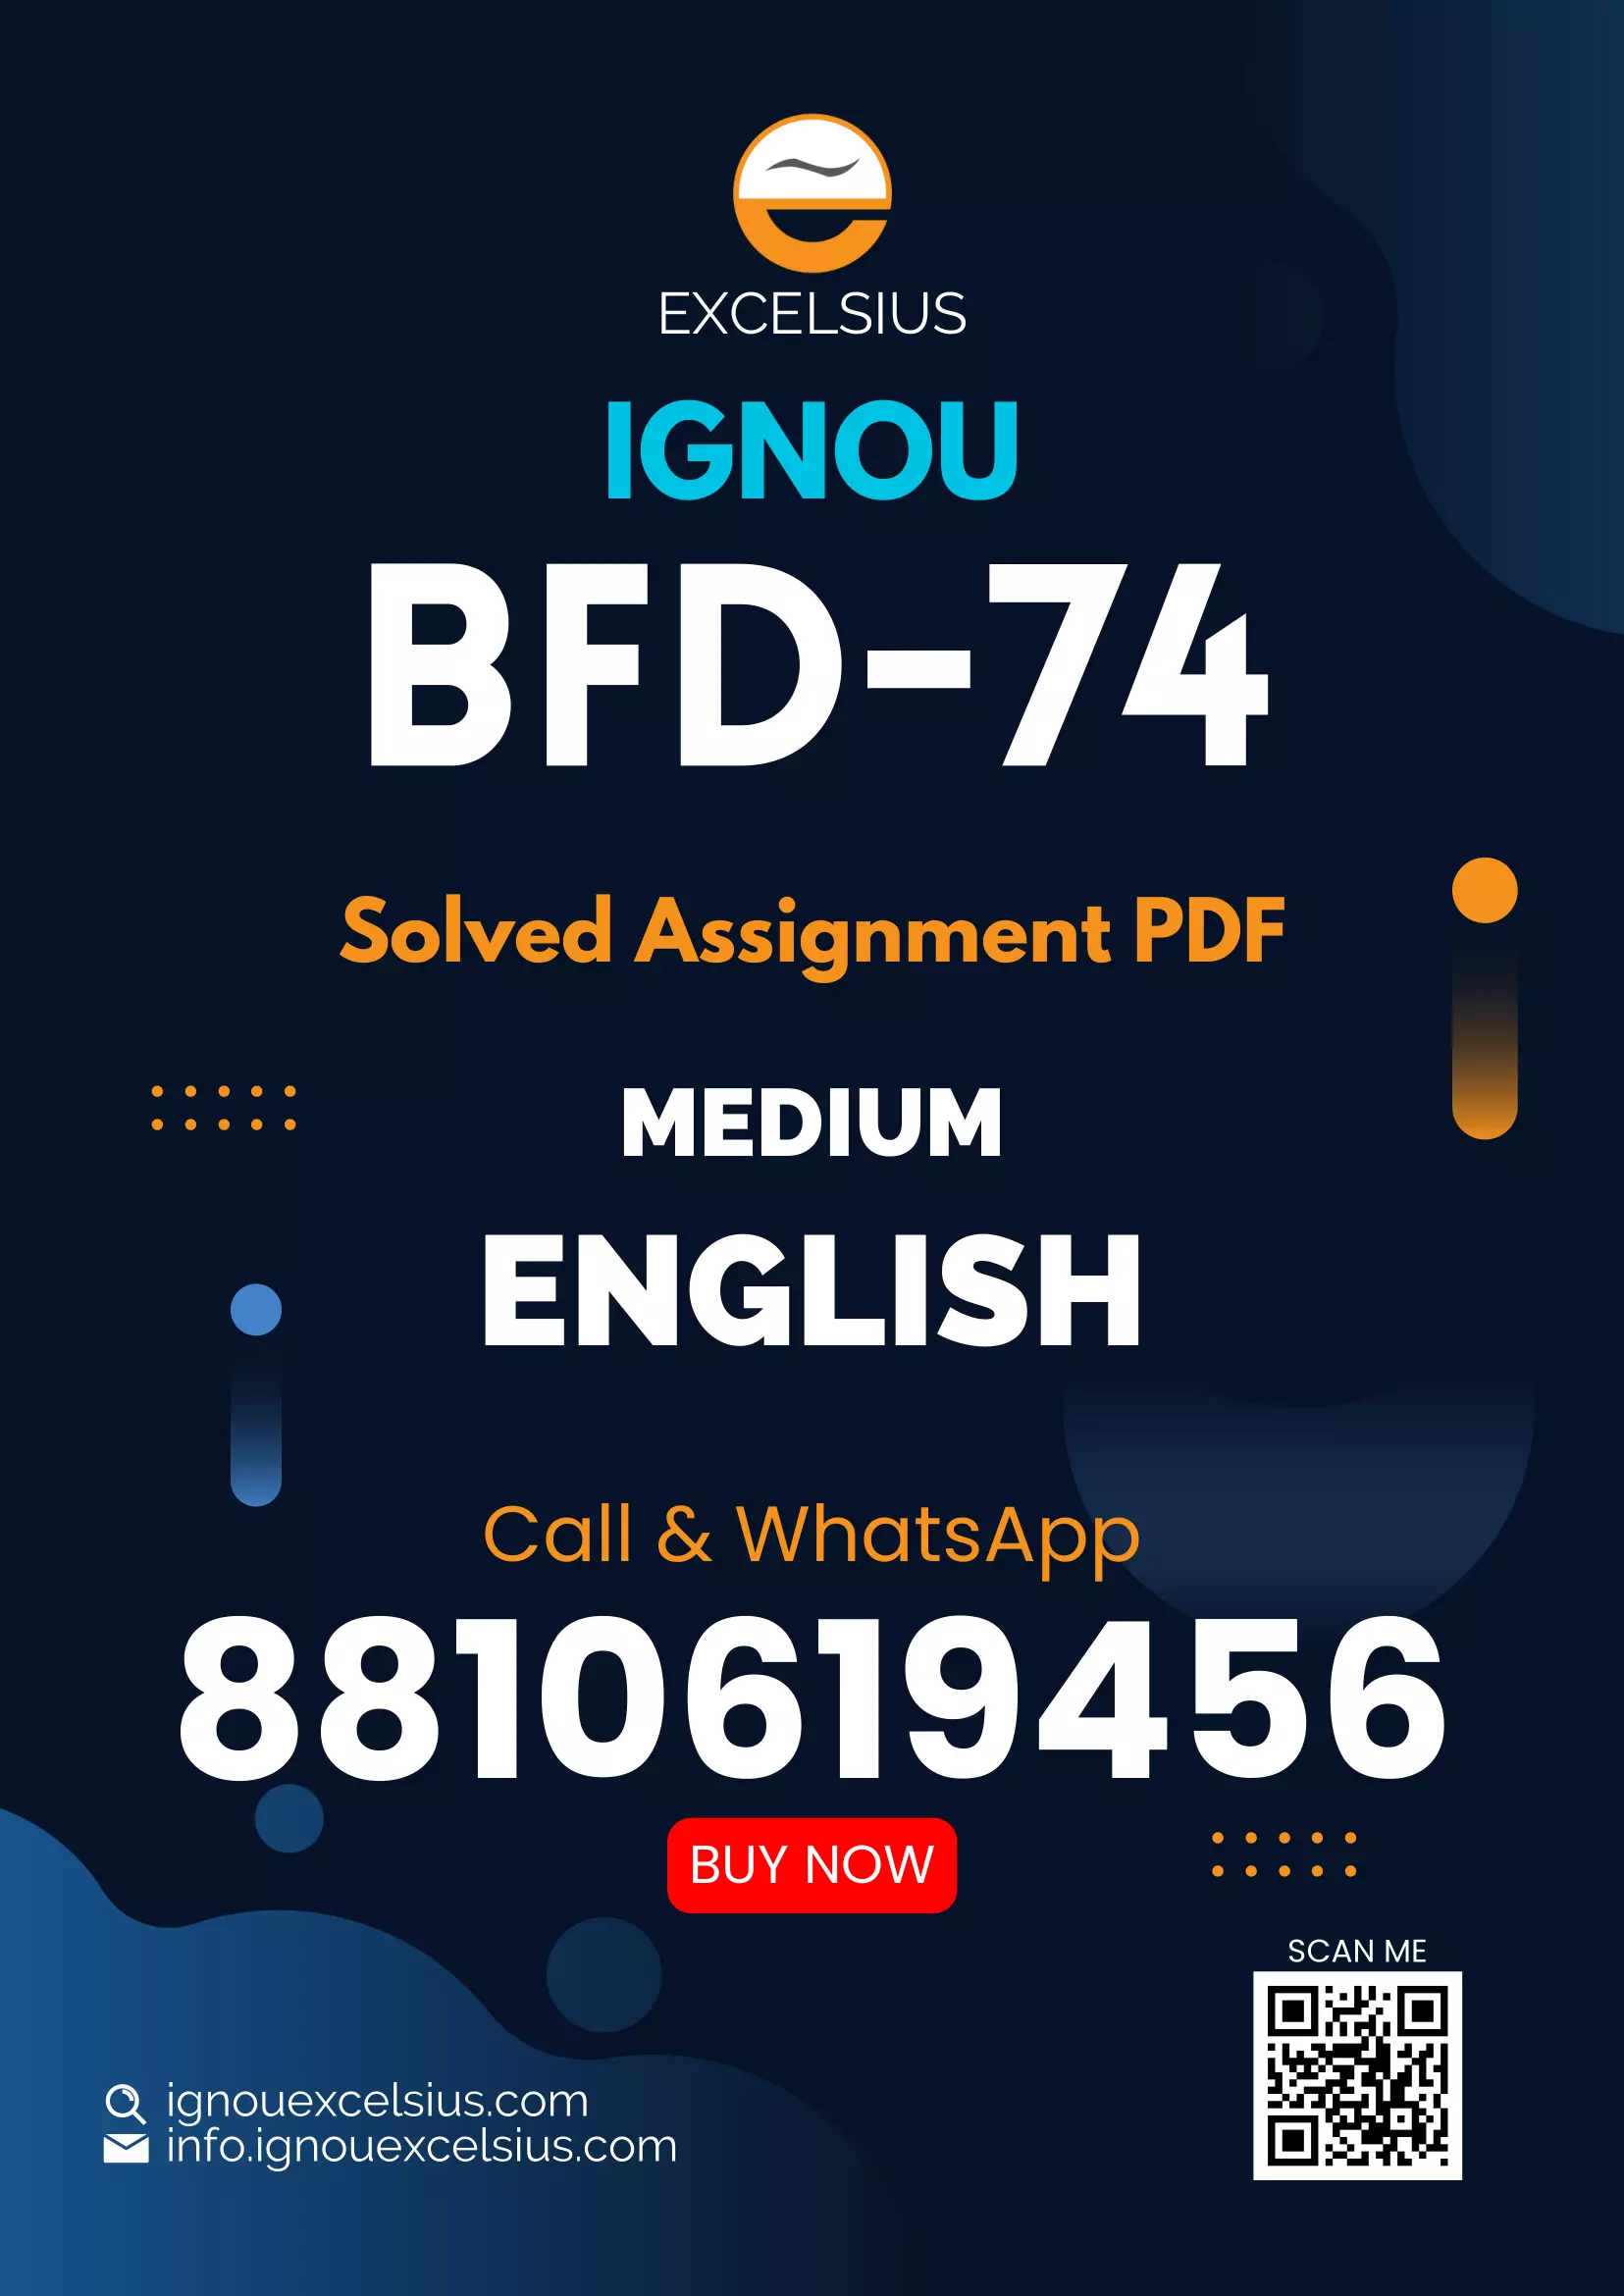 IGNOU BFD-74 - Communication and Entrepreneurship Latest Solved Assignment -January 2023 - July 2023